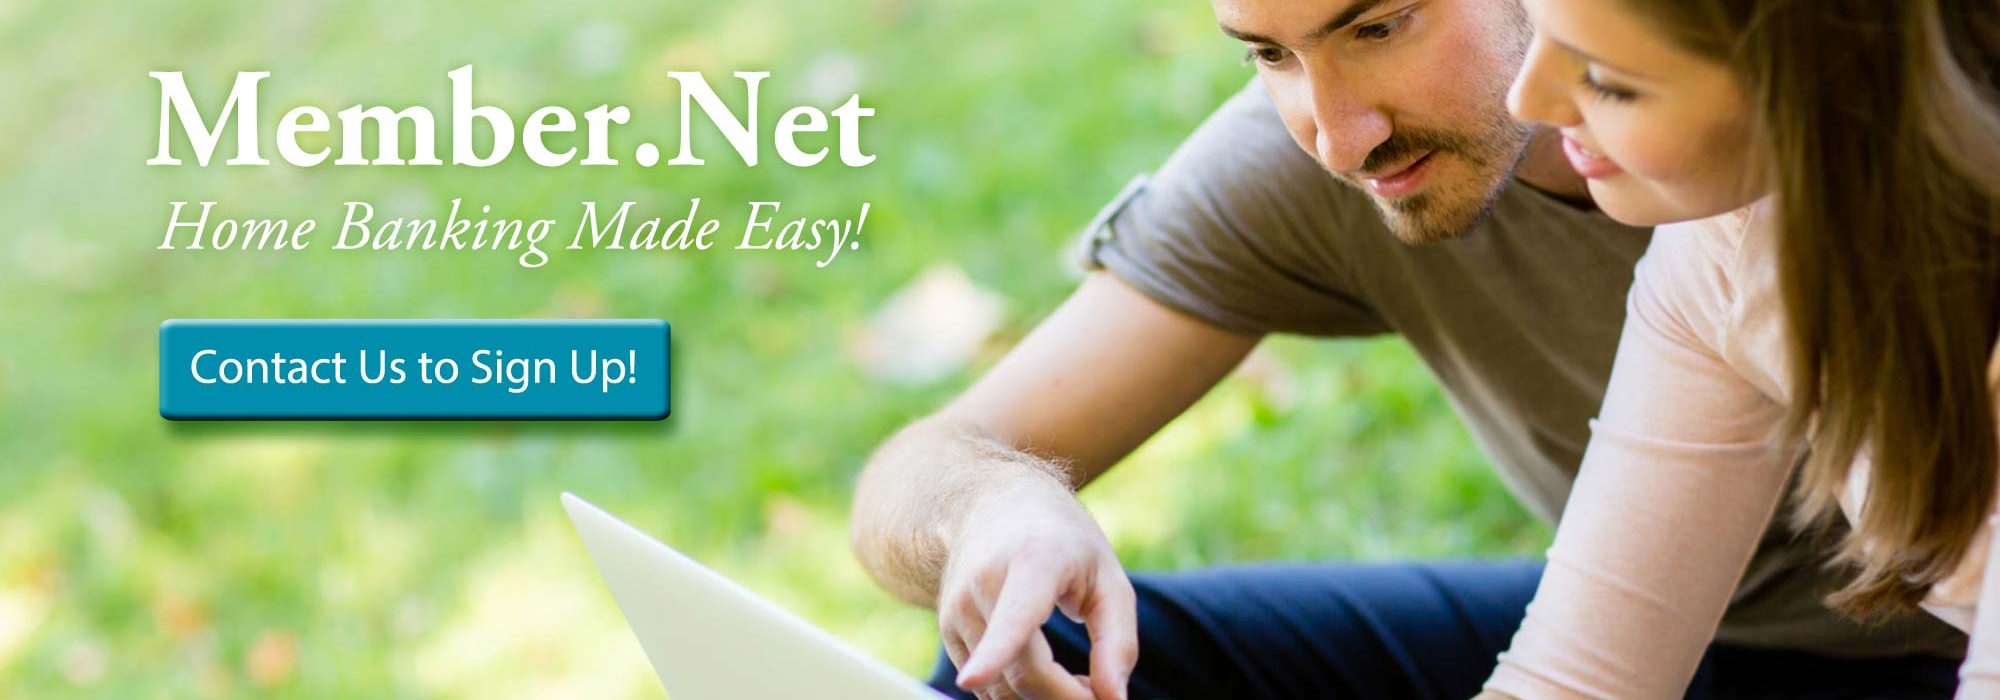 Sign Up for Member.Net Home Banking.